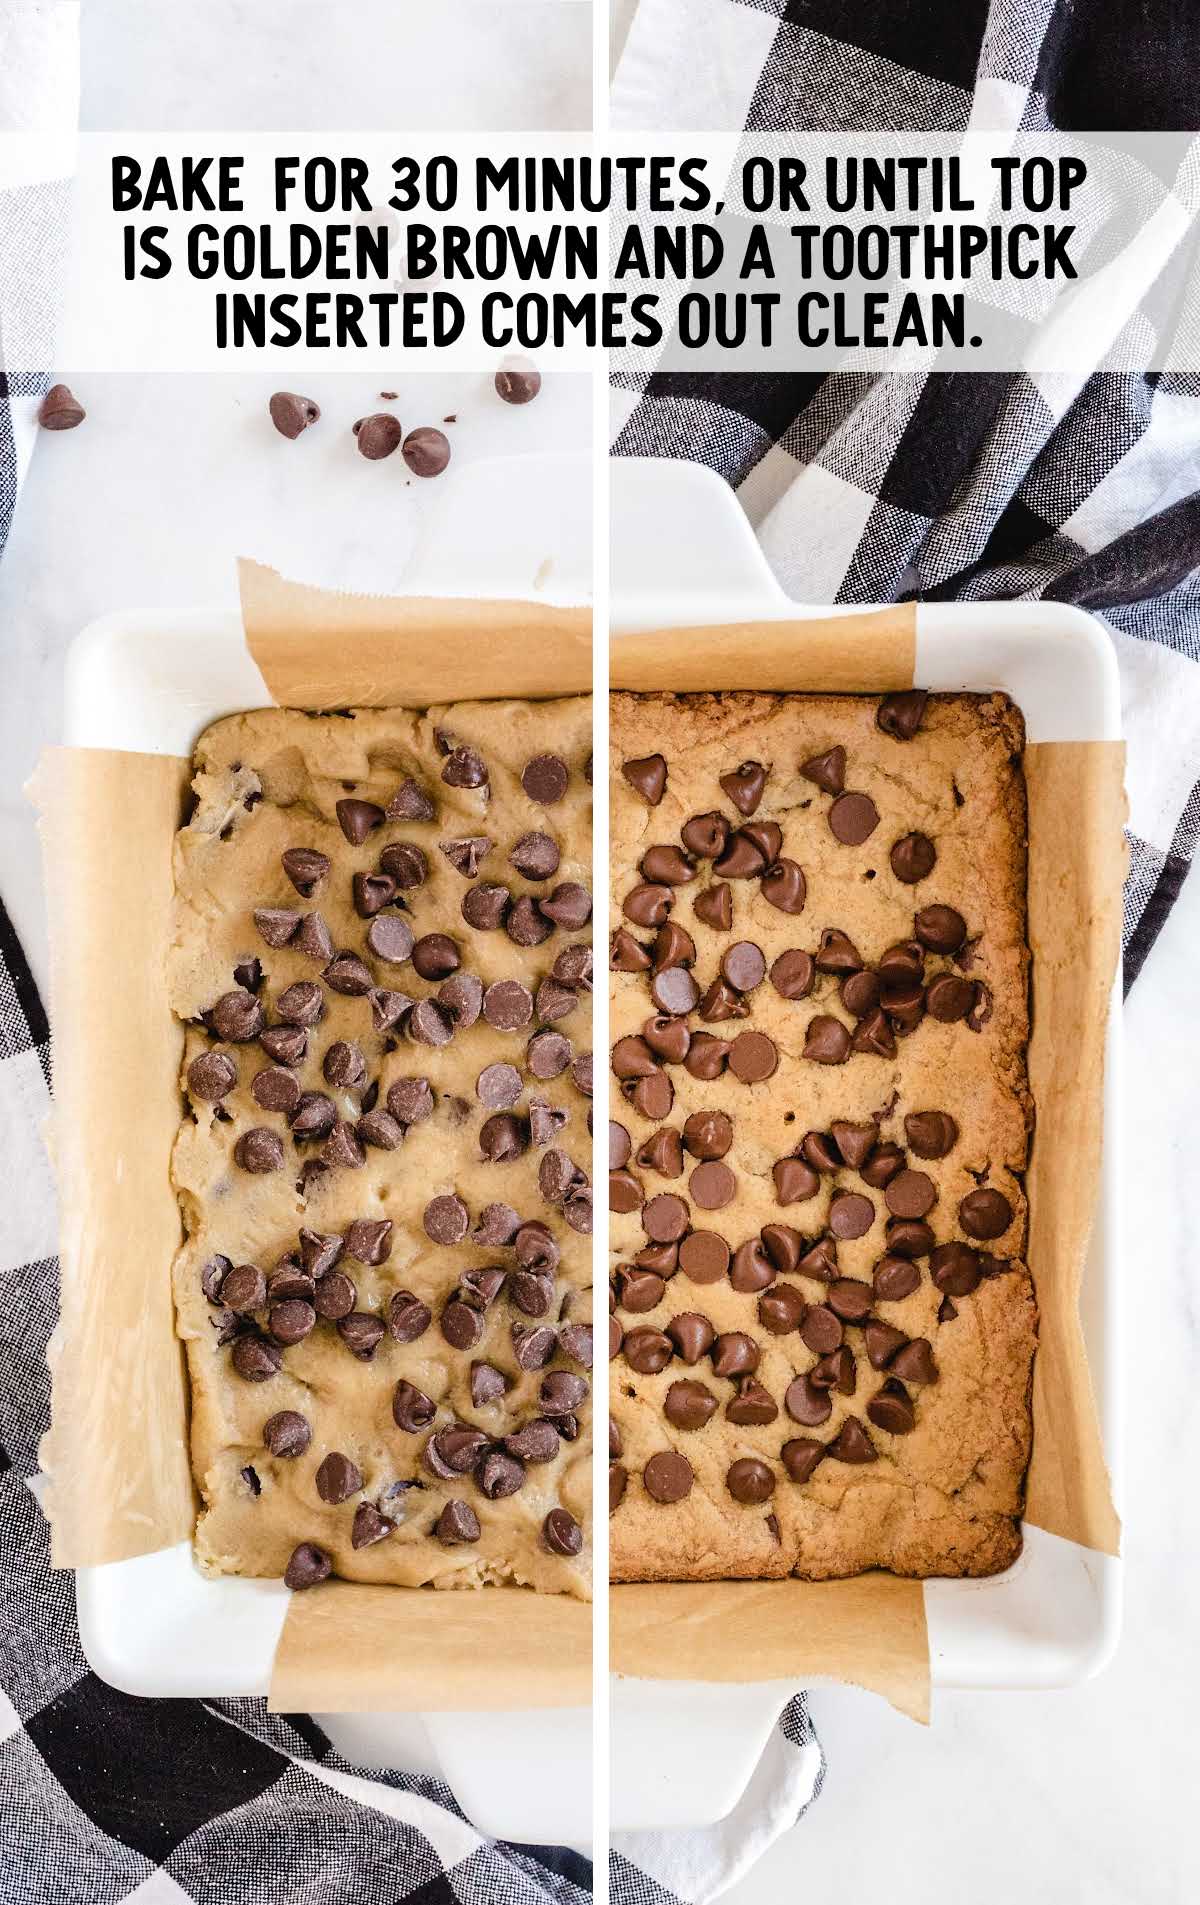 batter placed in a baking pan and topped with chocolate chips then being baked